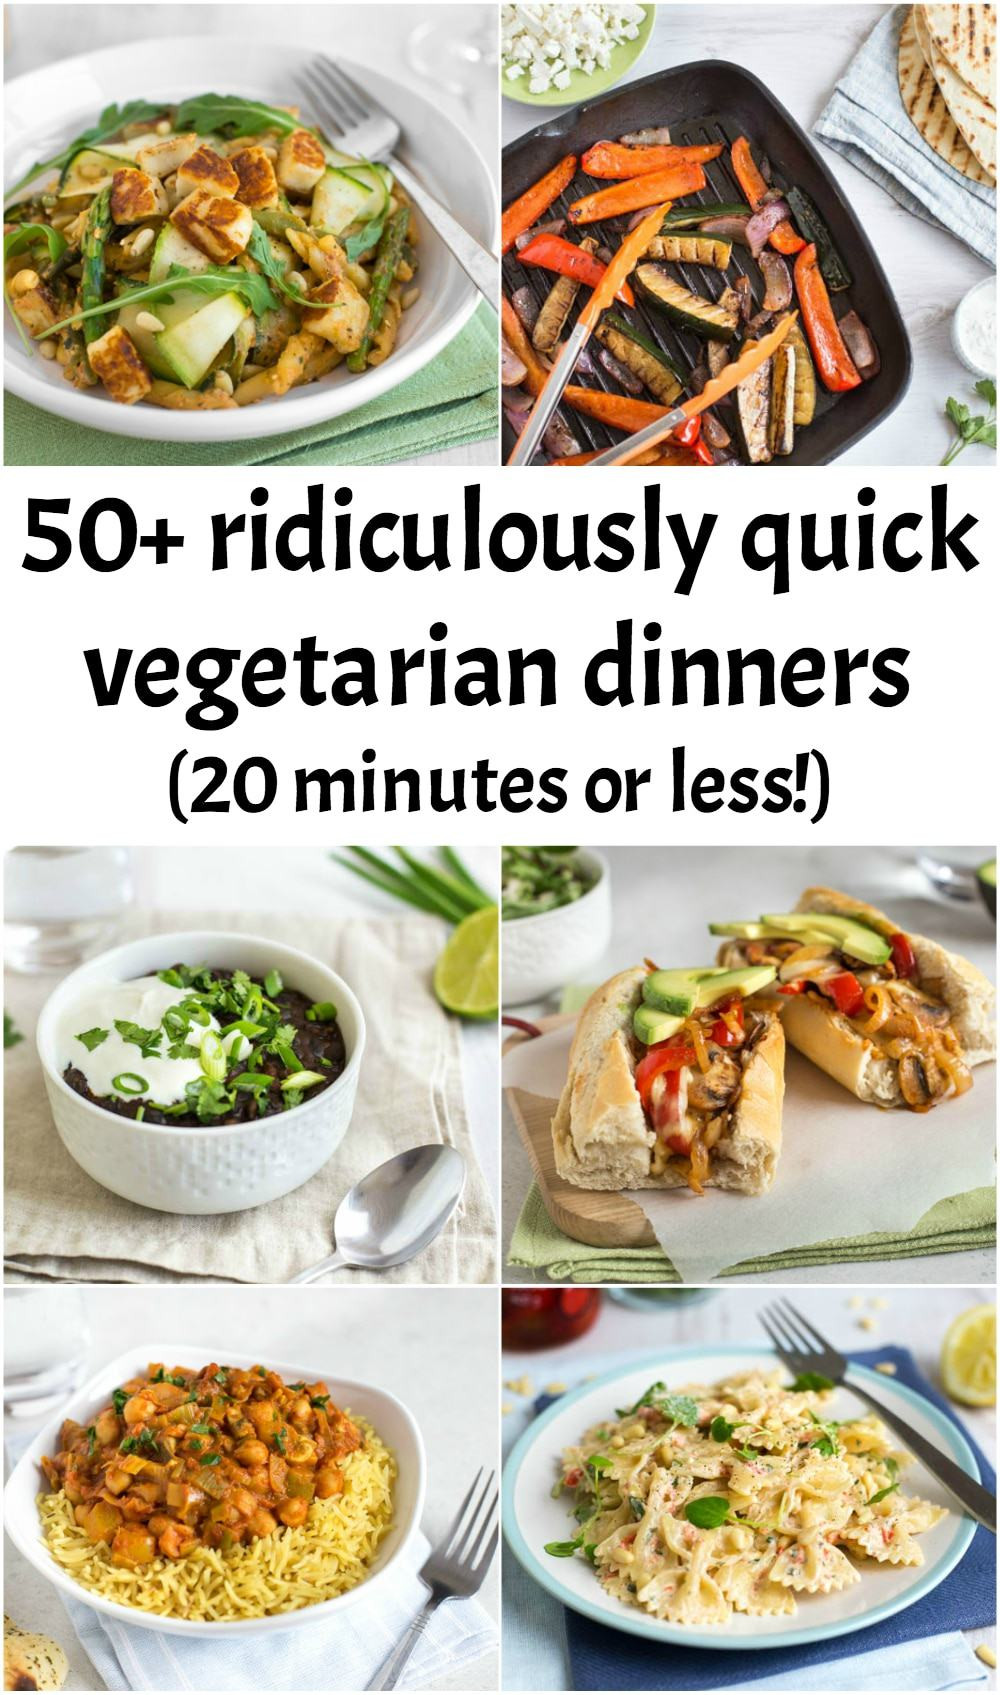 Easy Dinner Recipes Vegetarian
 50 ridiculously quick ve arian dinners 20 minutes or